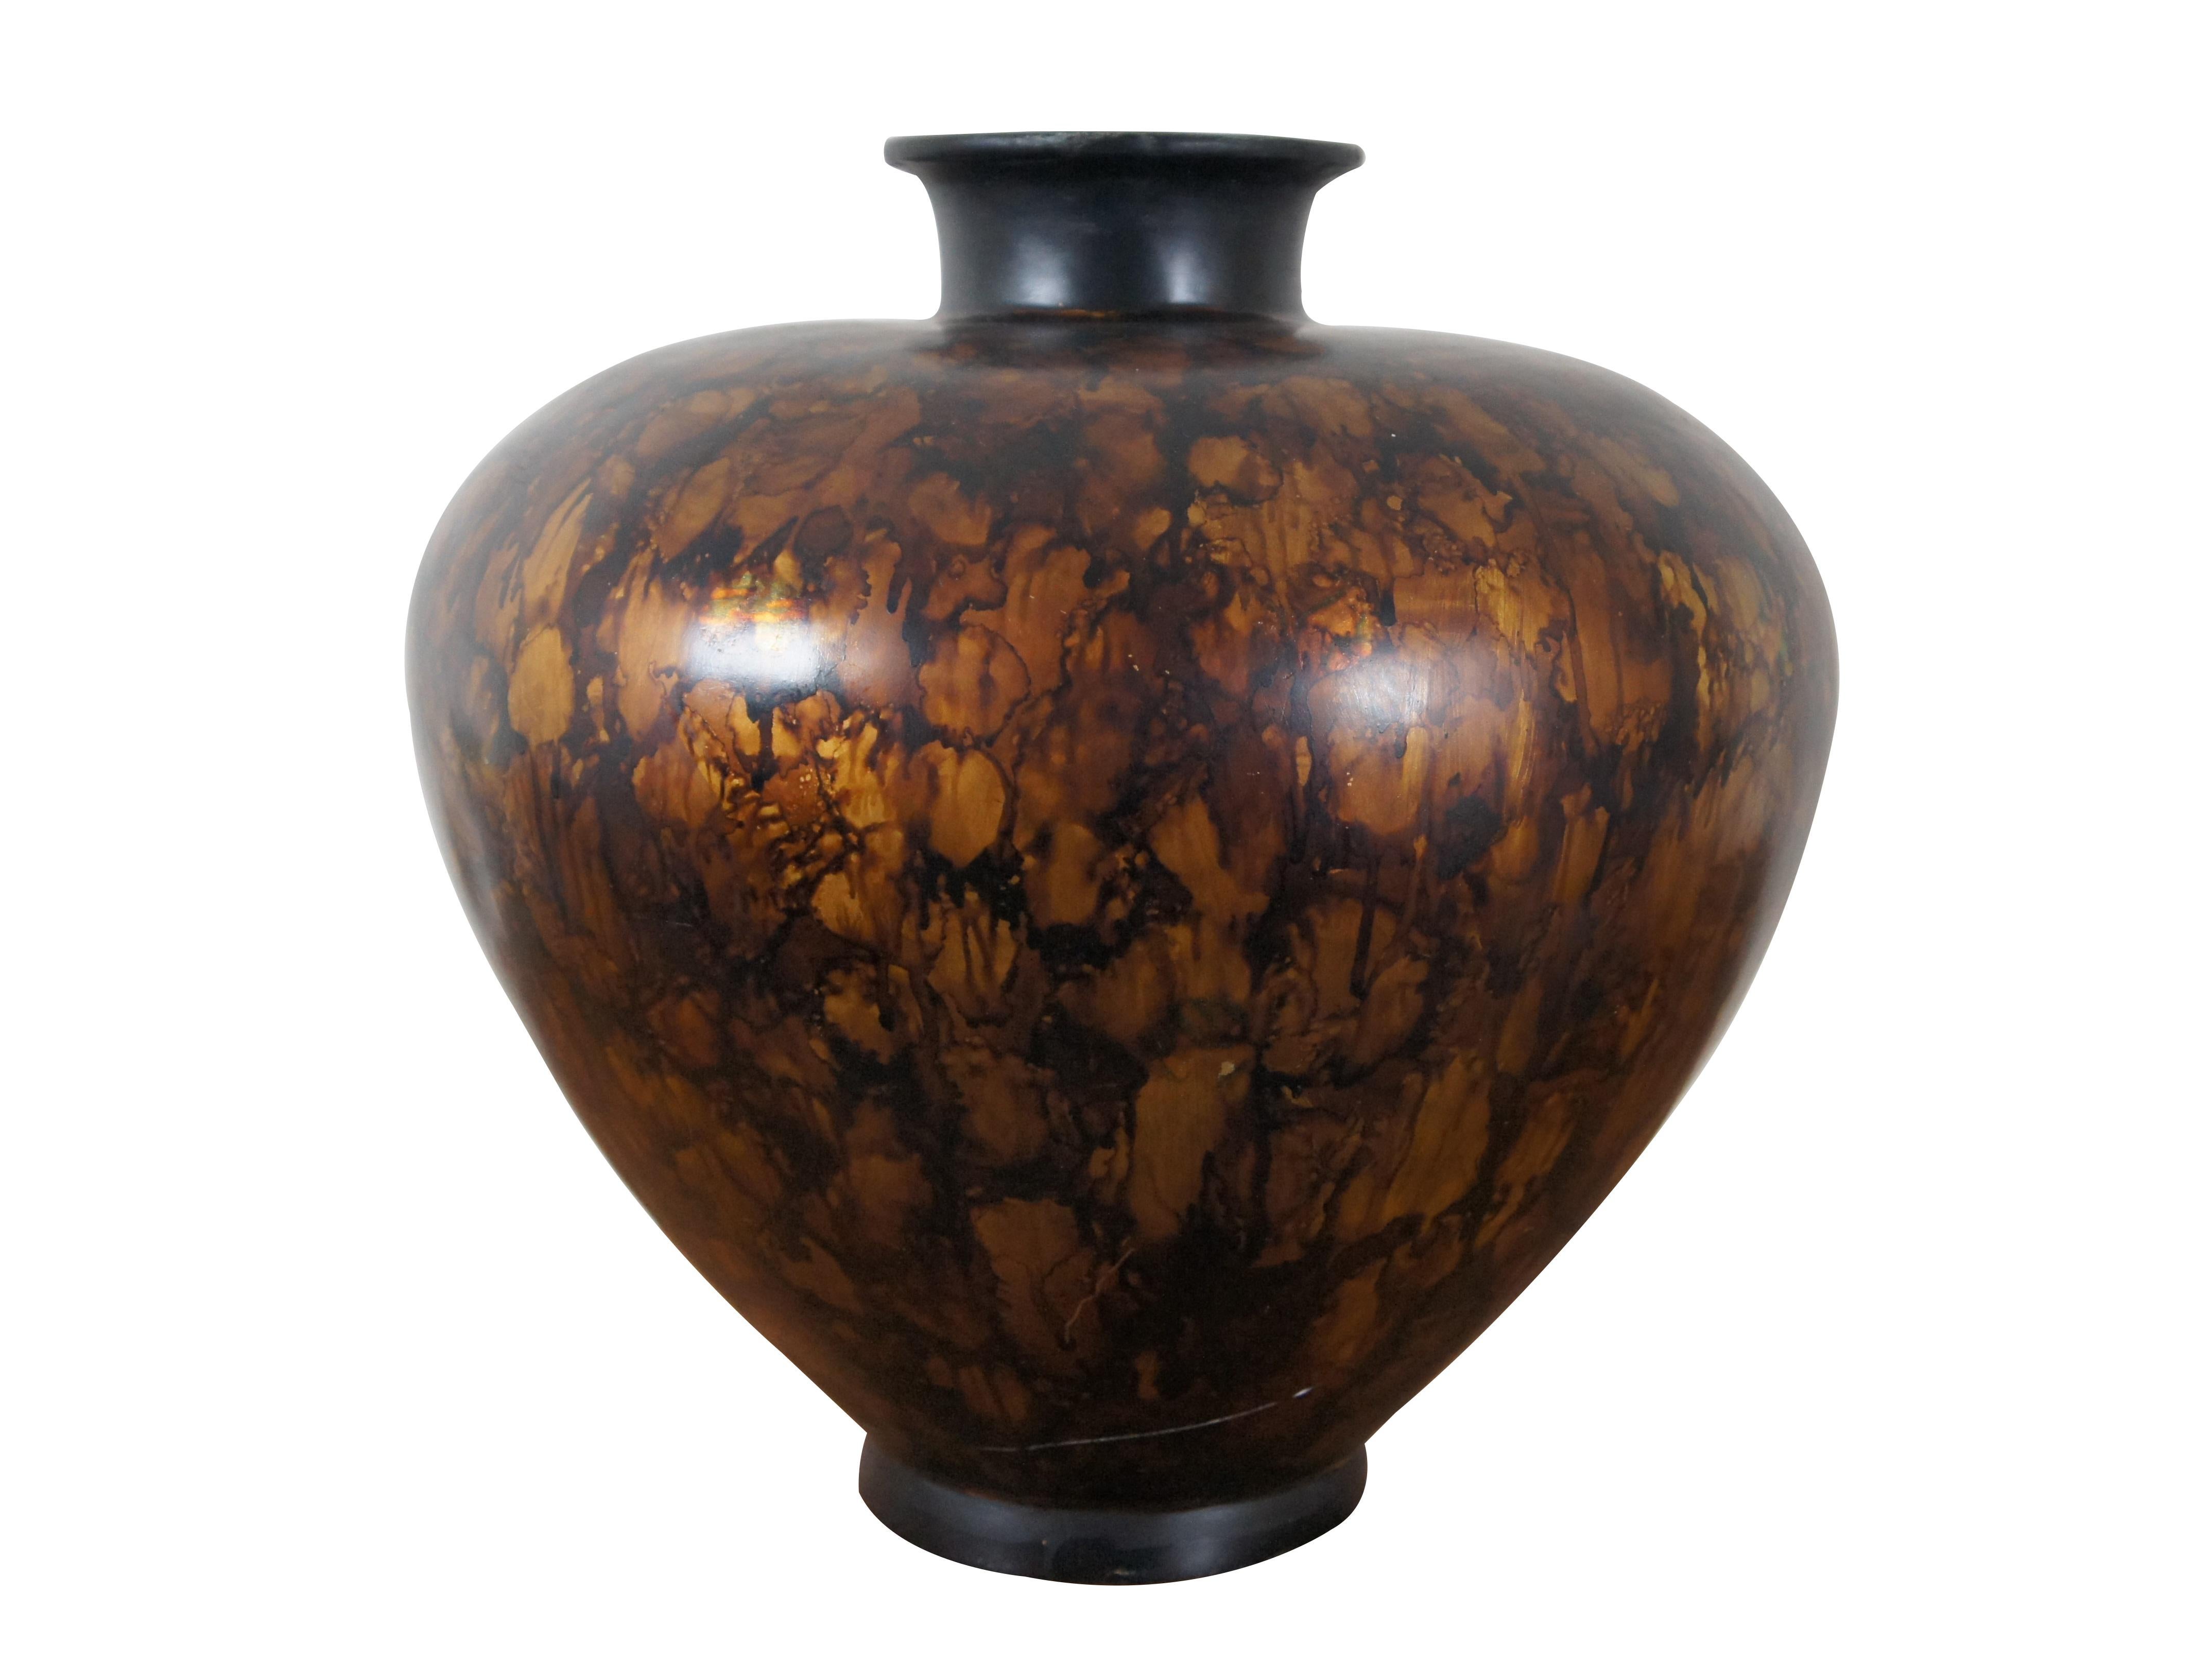 Adelina composite / resin  urn shaped vase, mottled with deep brown and metallic gold / amber. Product number KC0616

DIMENSIONS
20” x 18.5” (Diameter x Height)